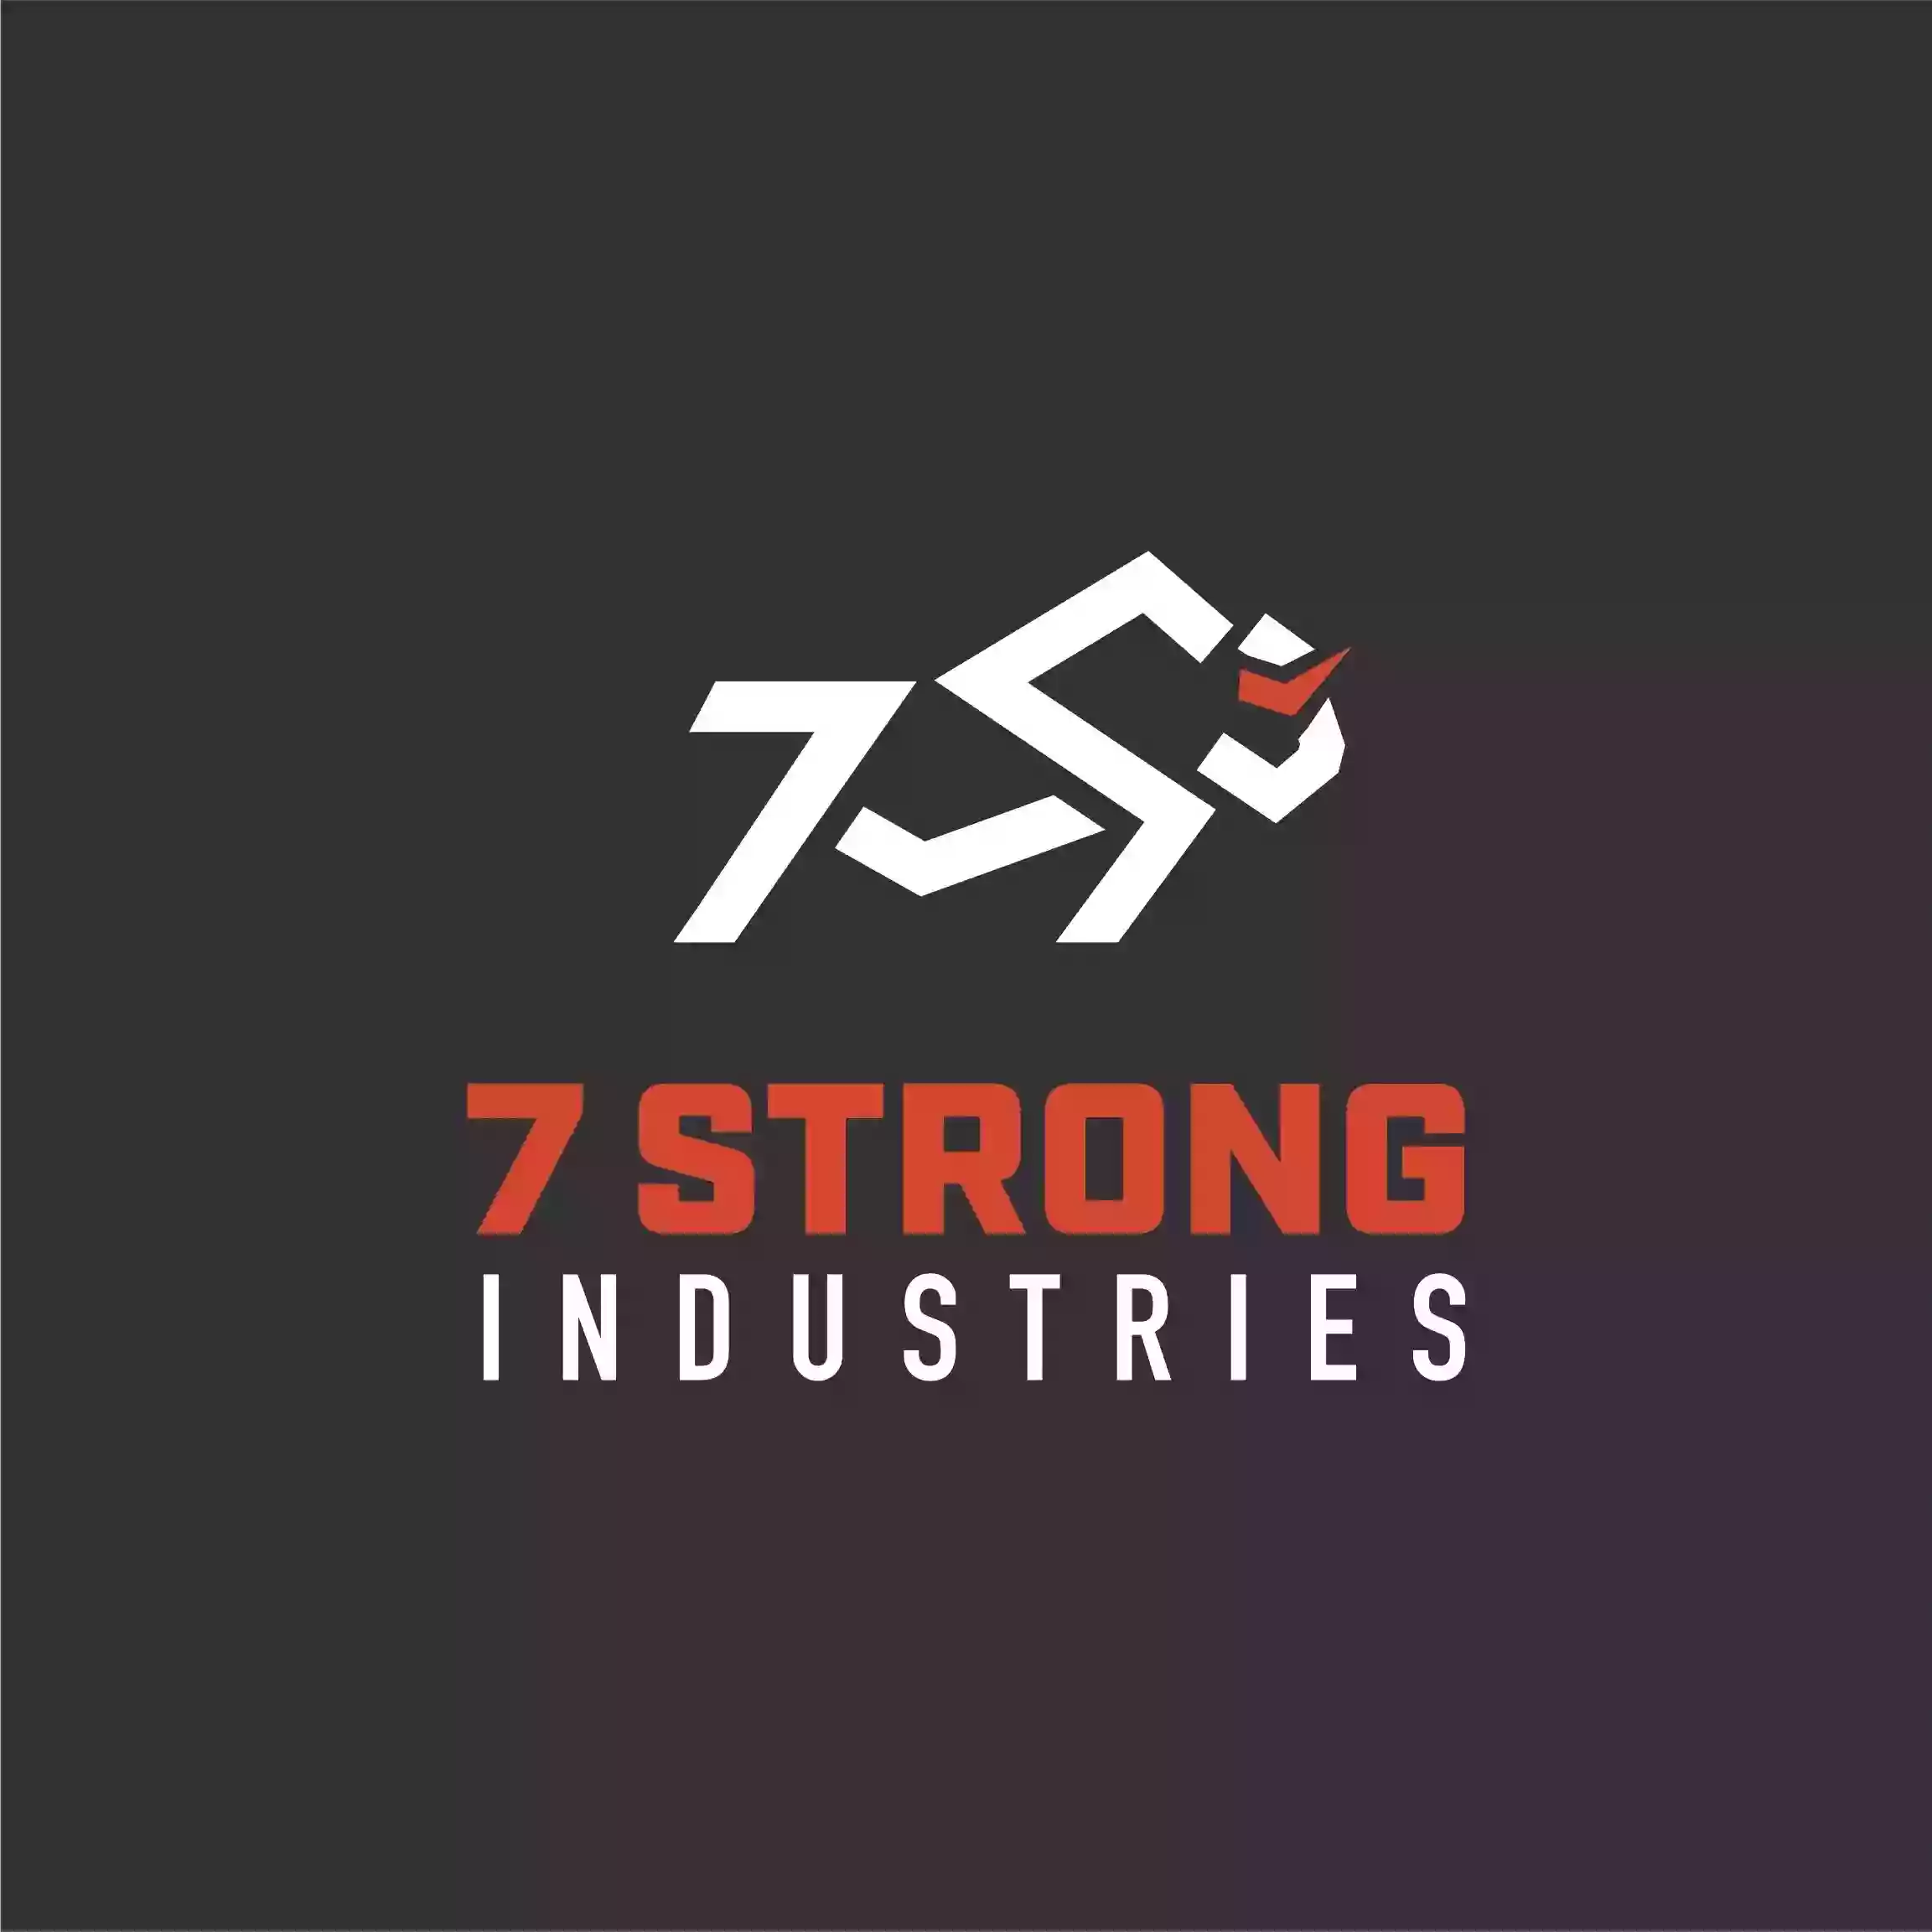 7 Strong Industries